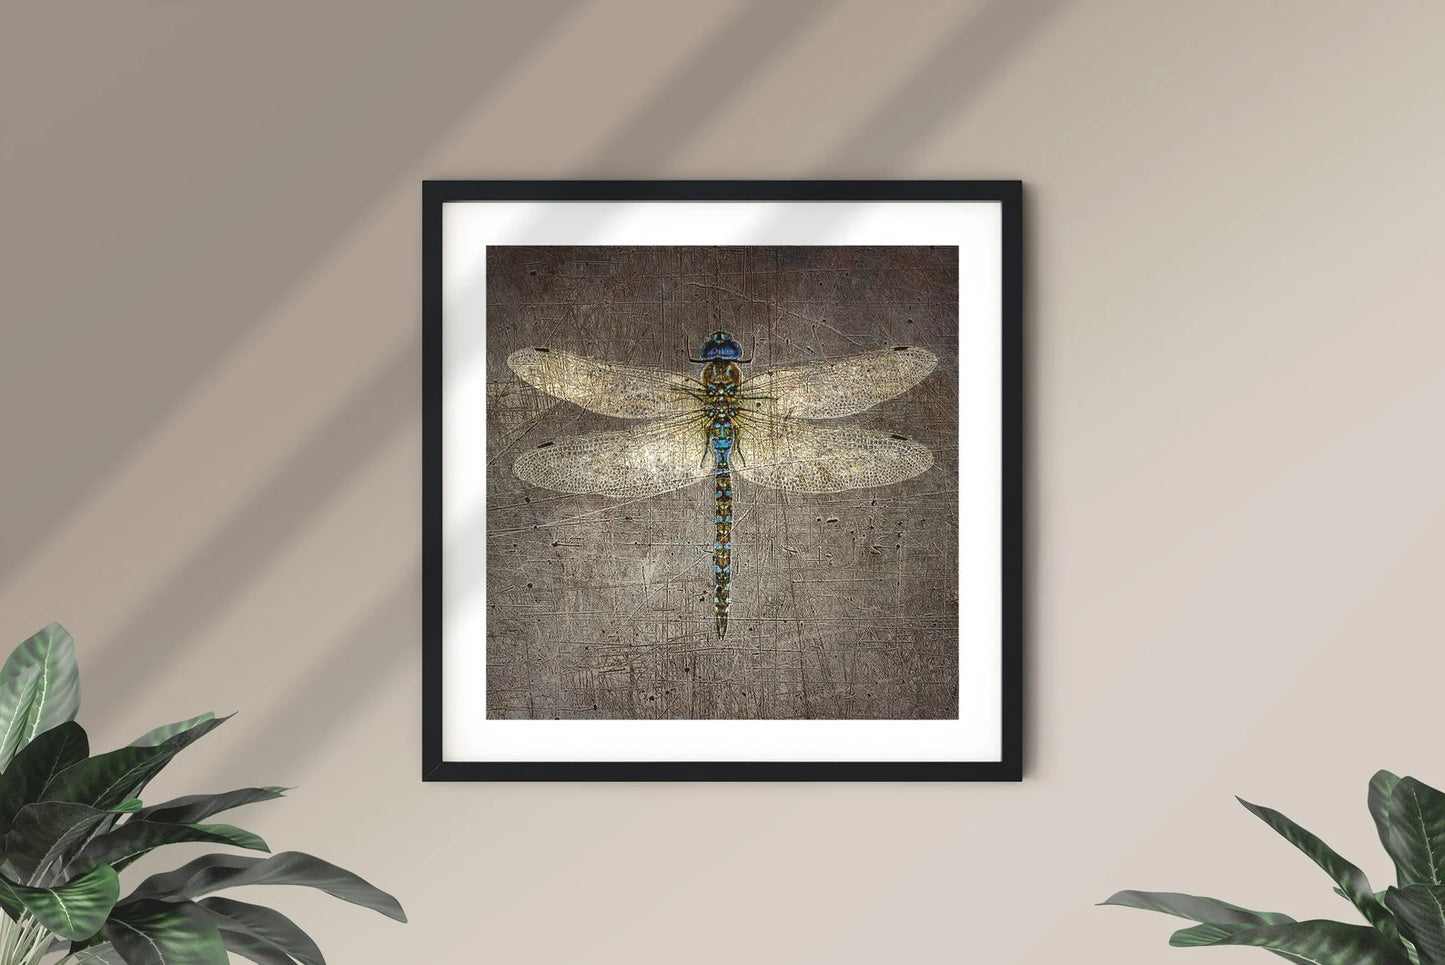 Dragonfly on Distressed Granite Background Print on Museum-quality Archival Paper Print framed and hung